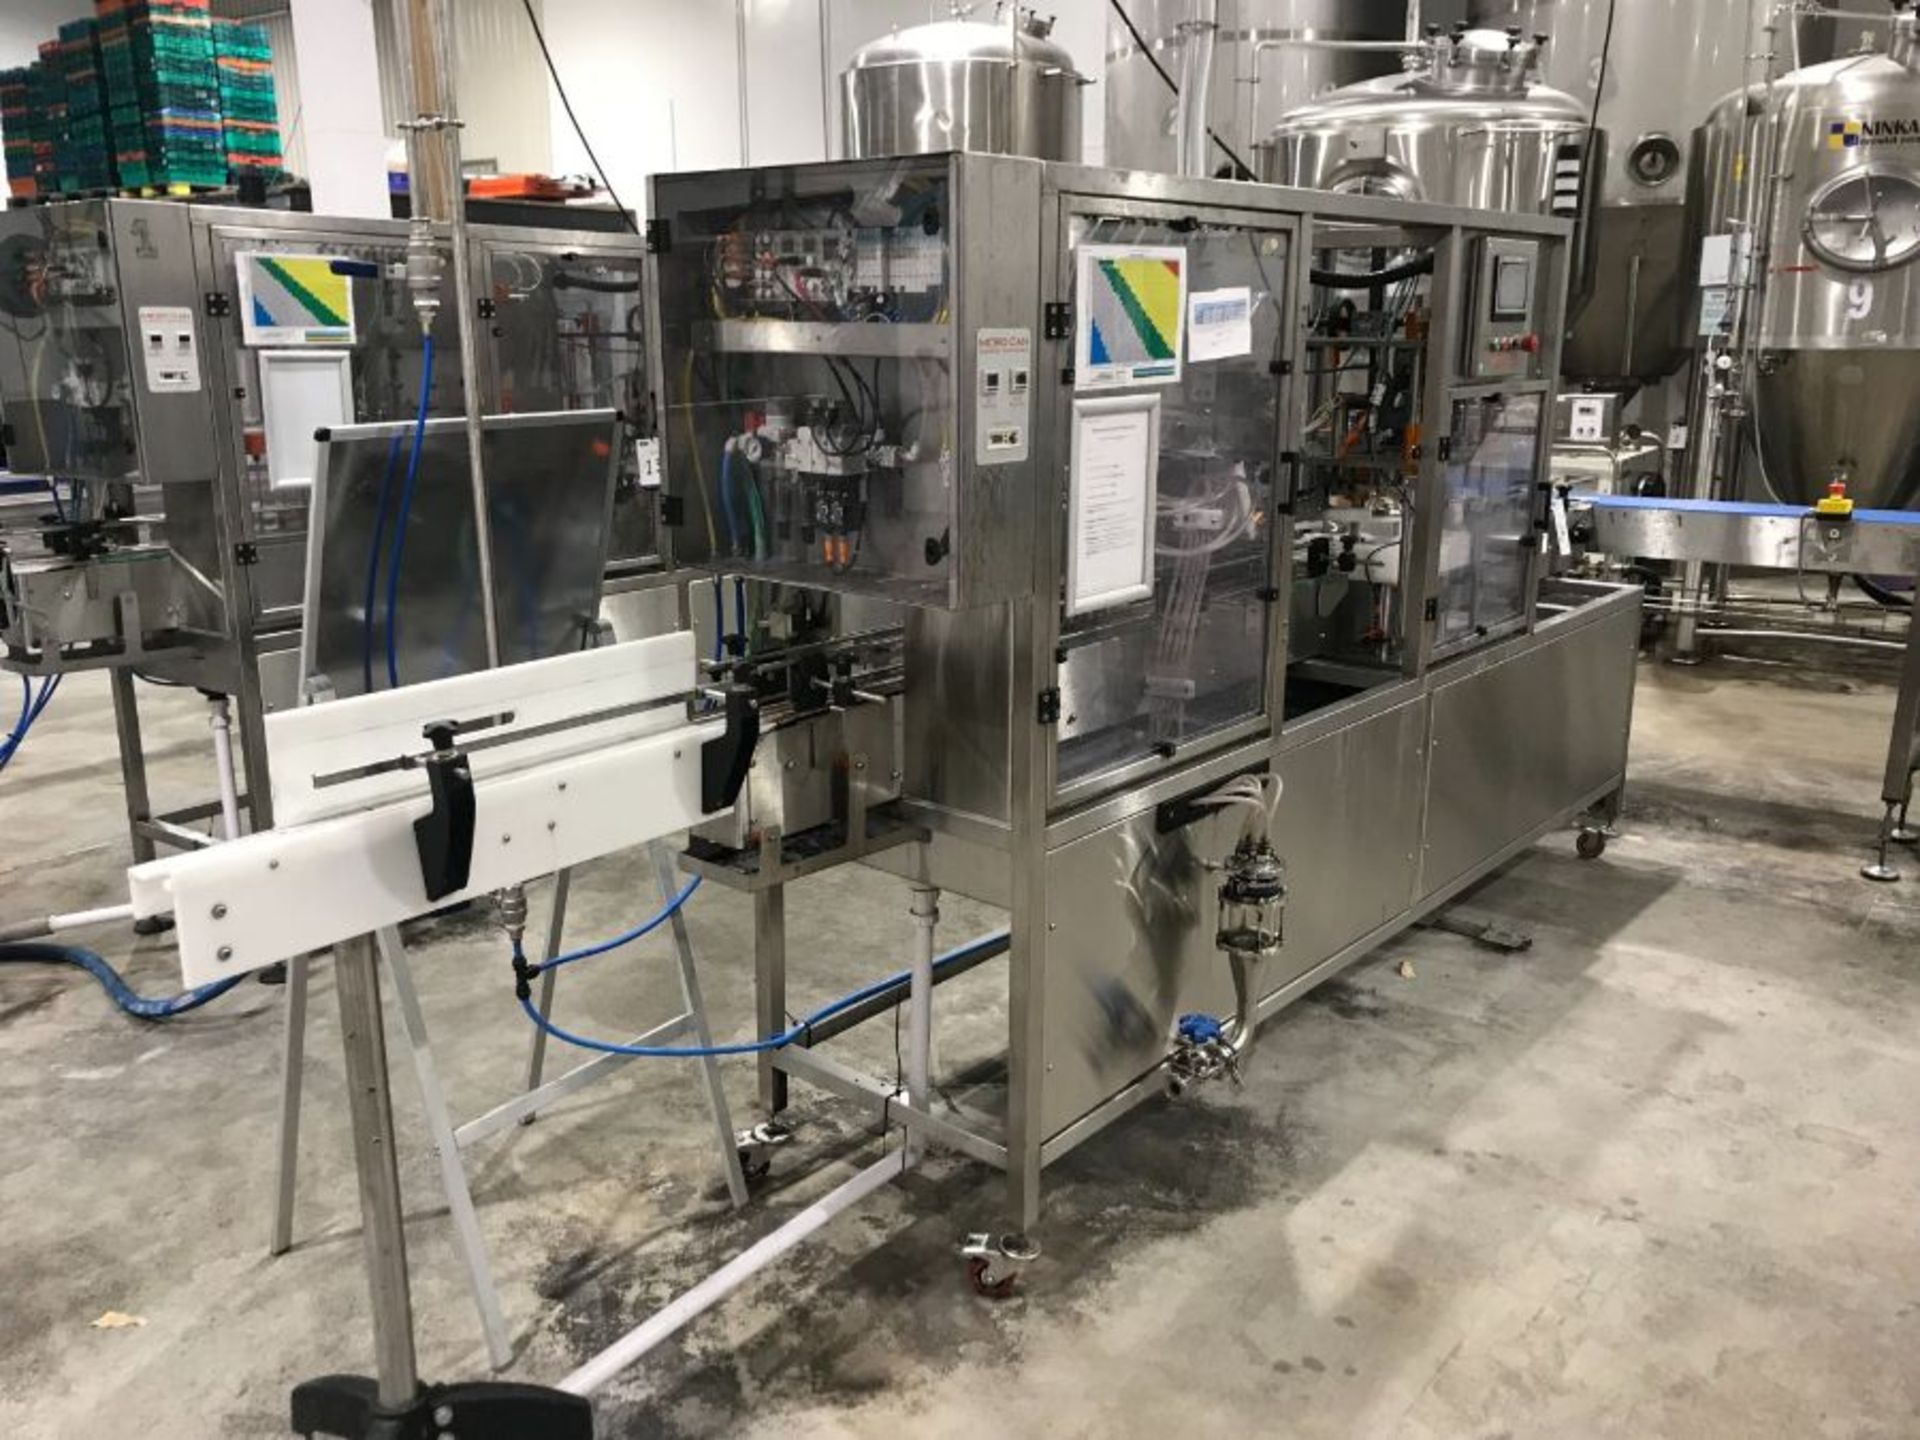 Micro Can Canning Machines CL5V3 linear can filling and seaming machine (2020) - Image 7 of 10